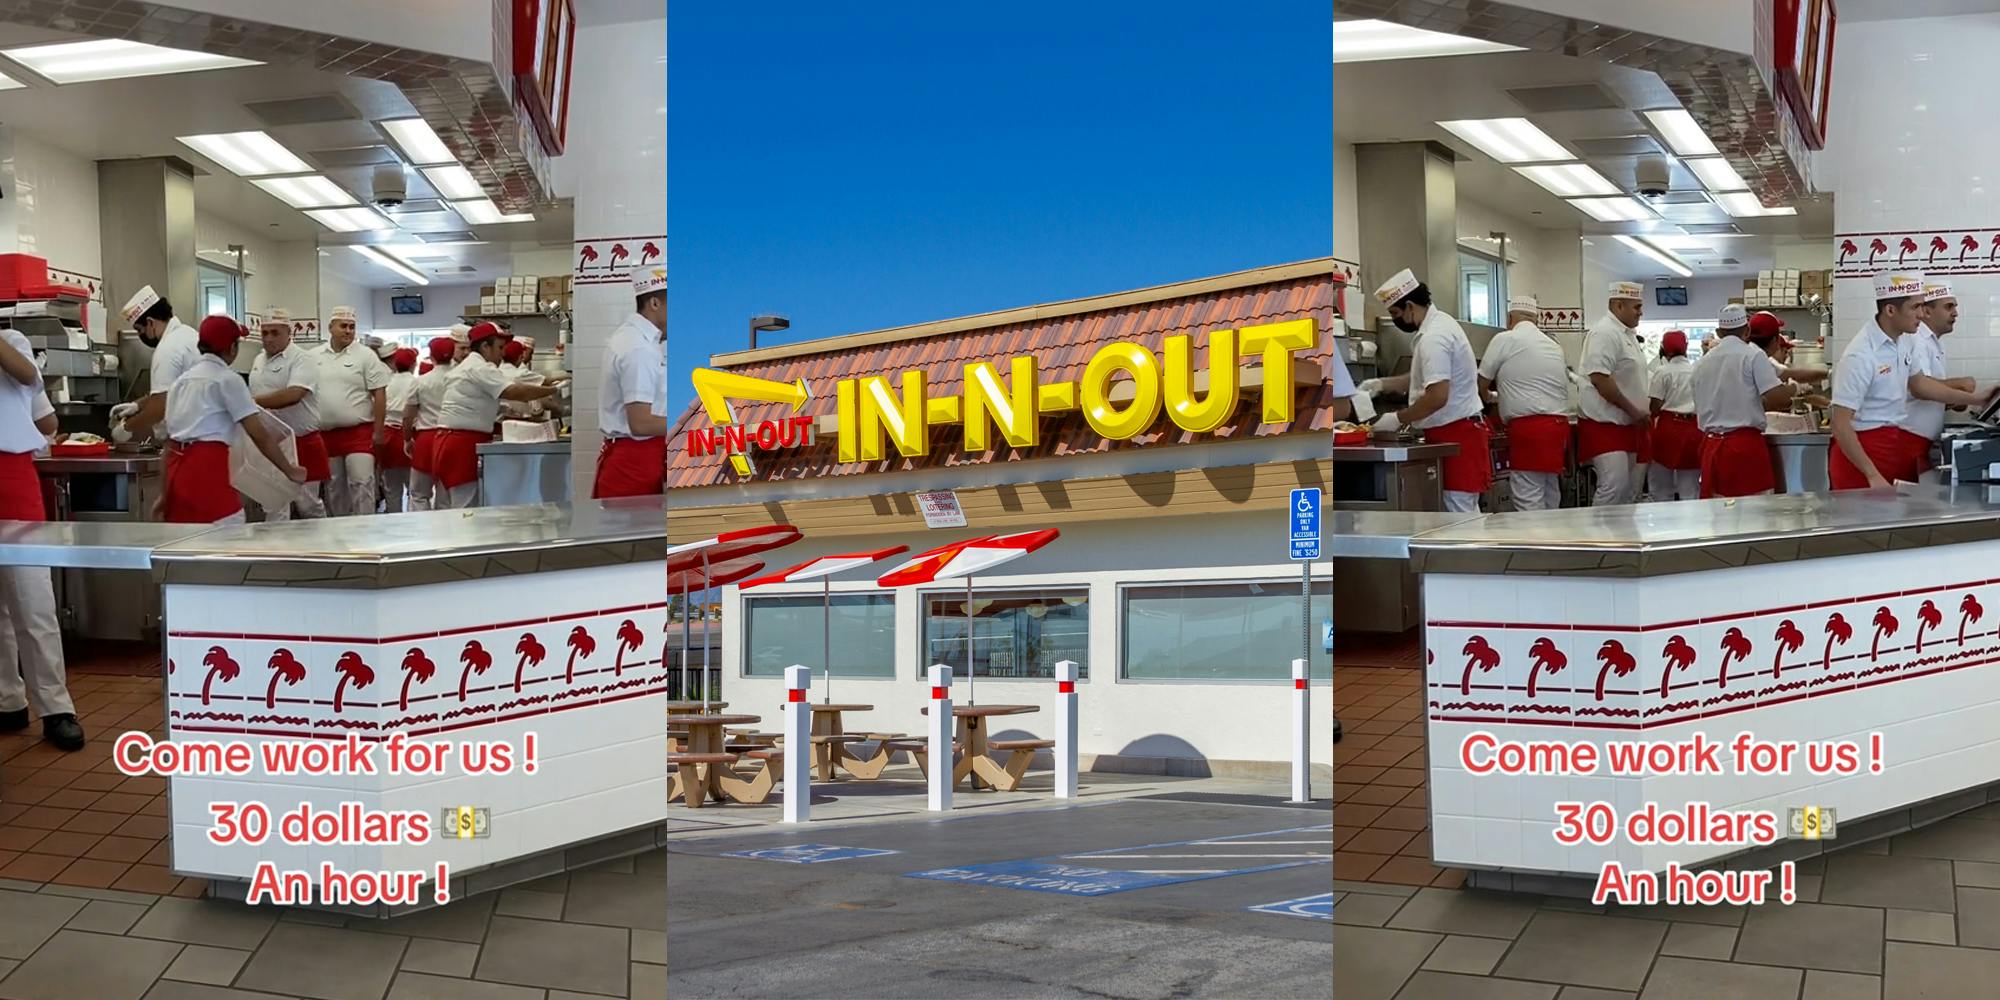 In-N-Out Burger workers with caption "Come work for us! 30 dollars An hour!" (l) In-N-Out Burger building with signs (c) In-N-Out Burger workers with caption "Come work for us! 30 dollars An hour!" (r)